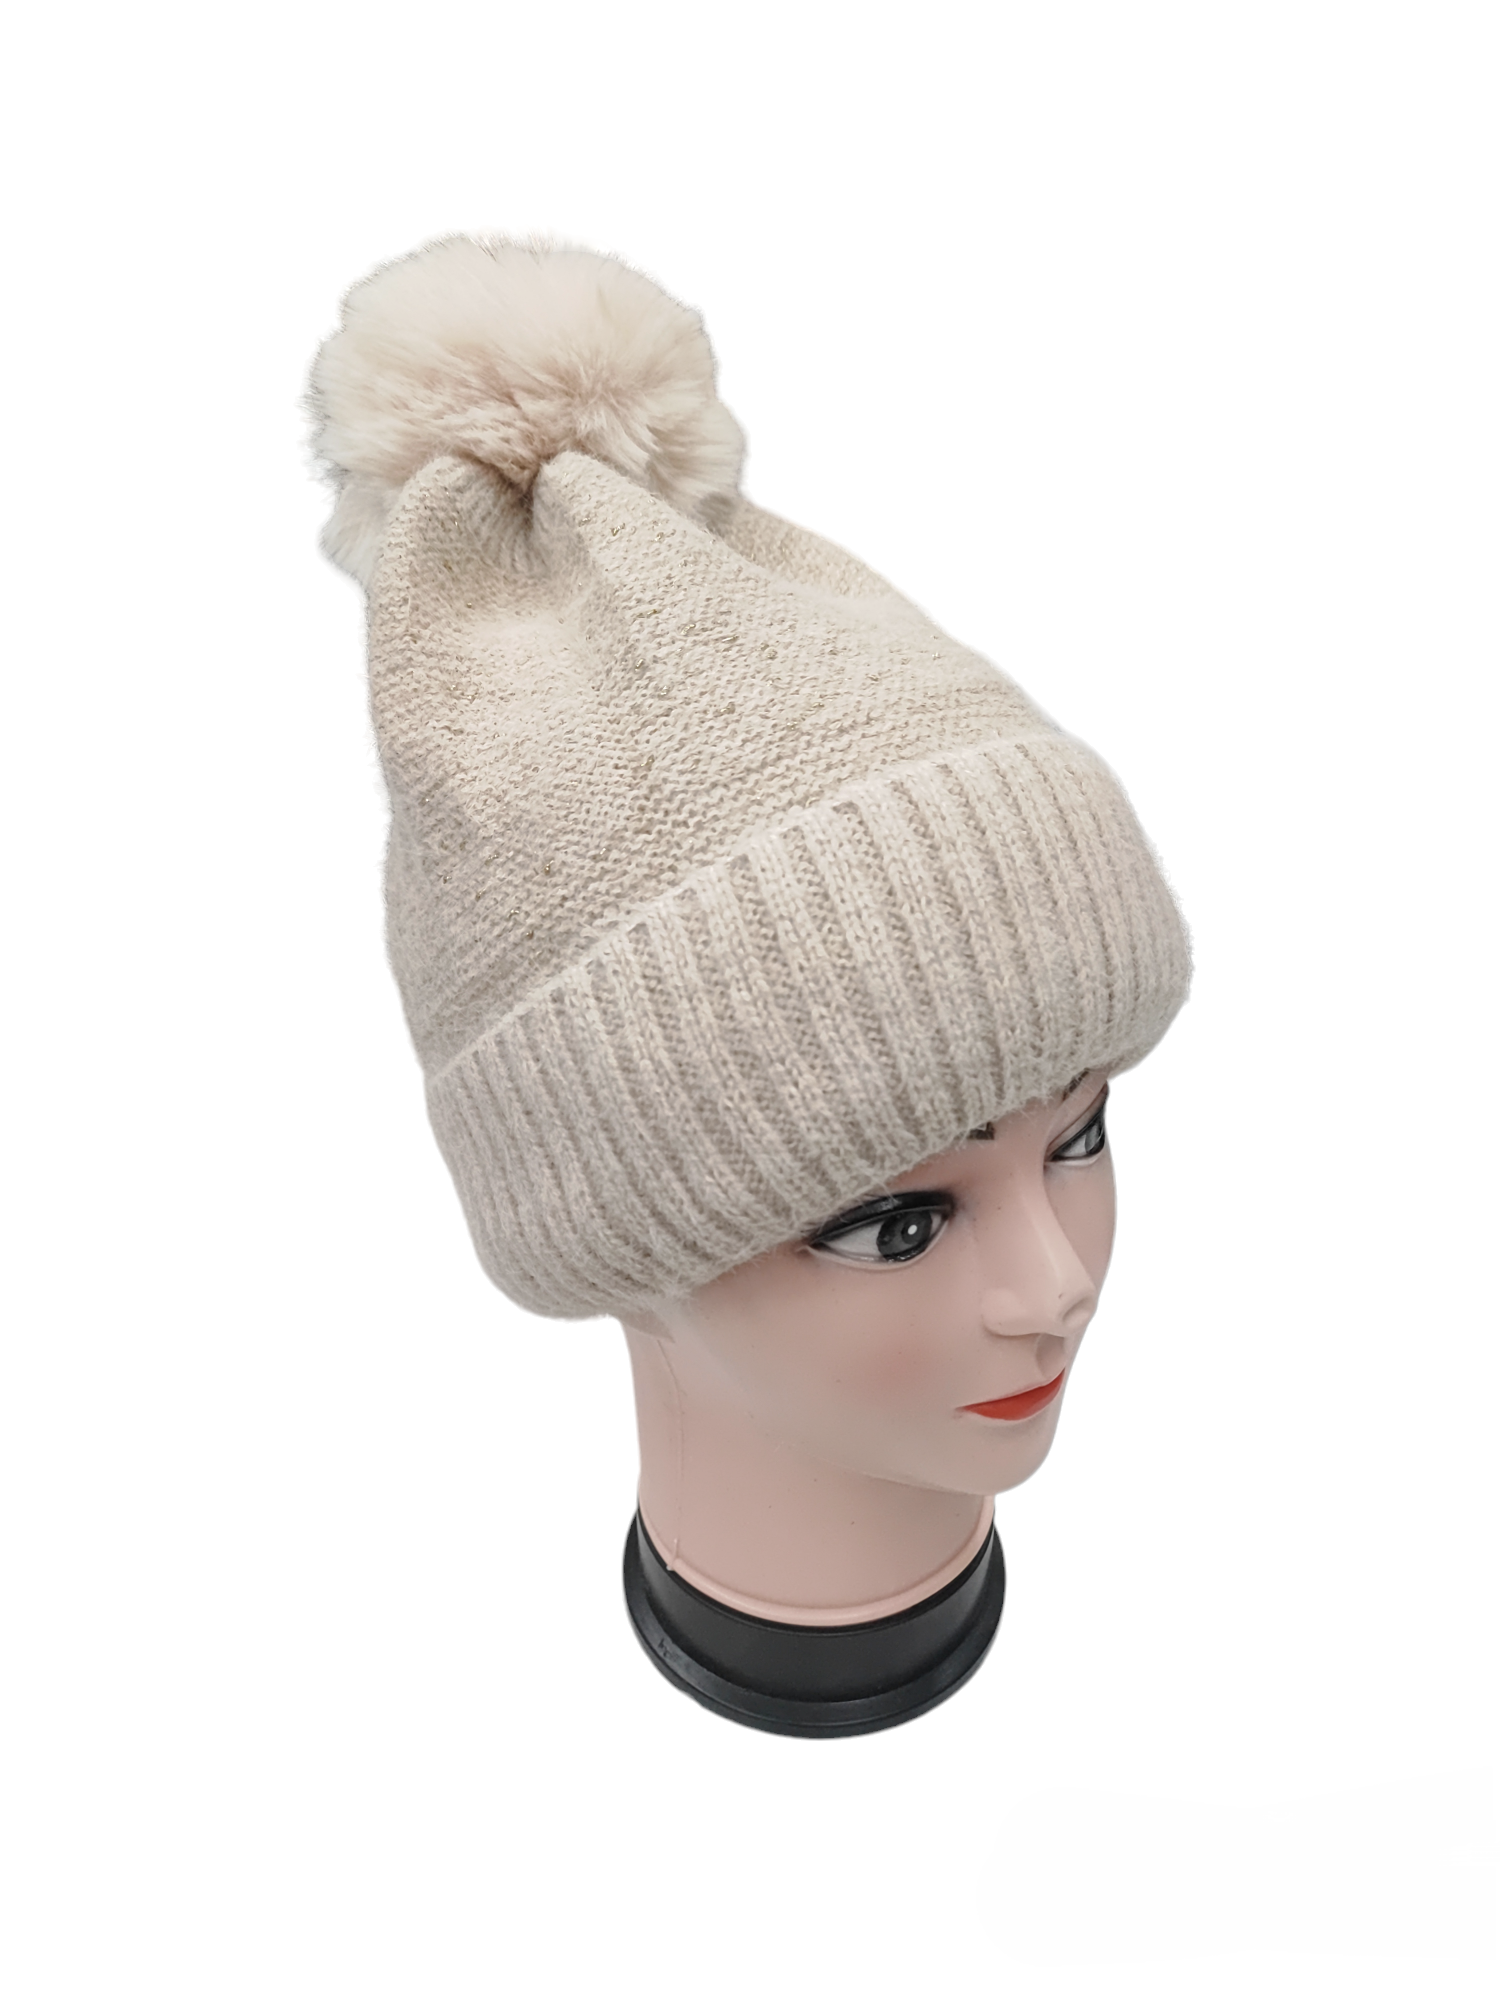 Women's hat with pompom filling (x12) #4